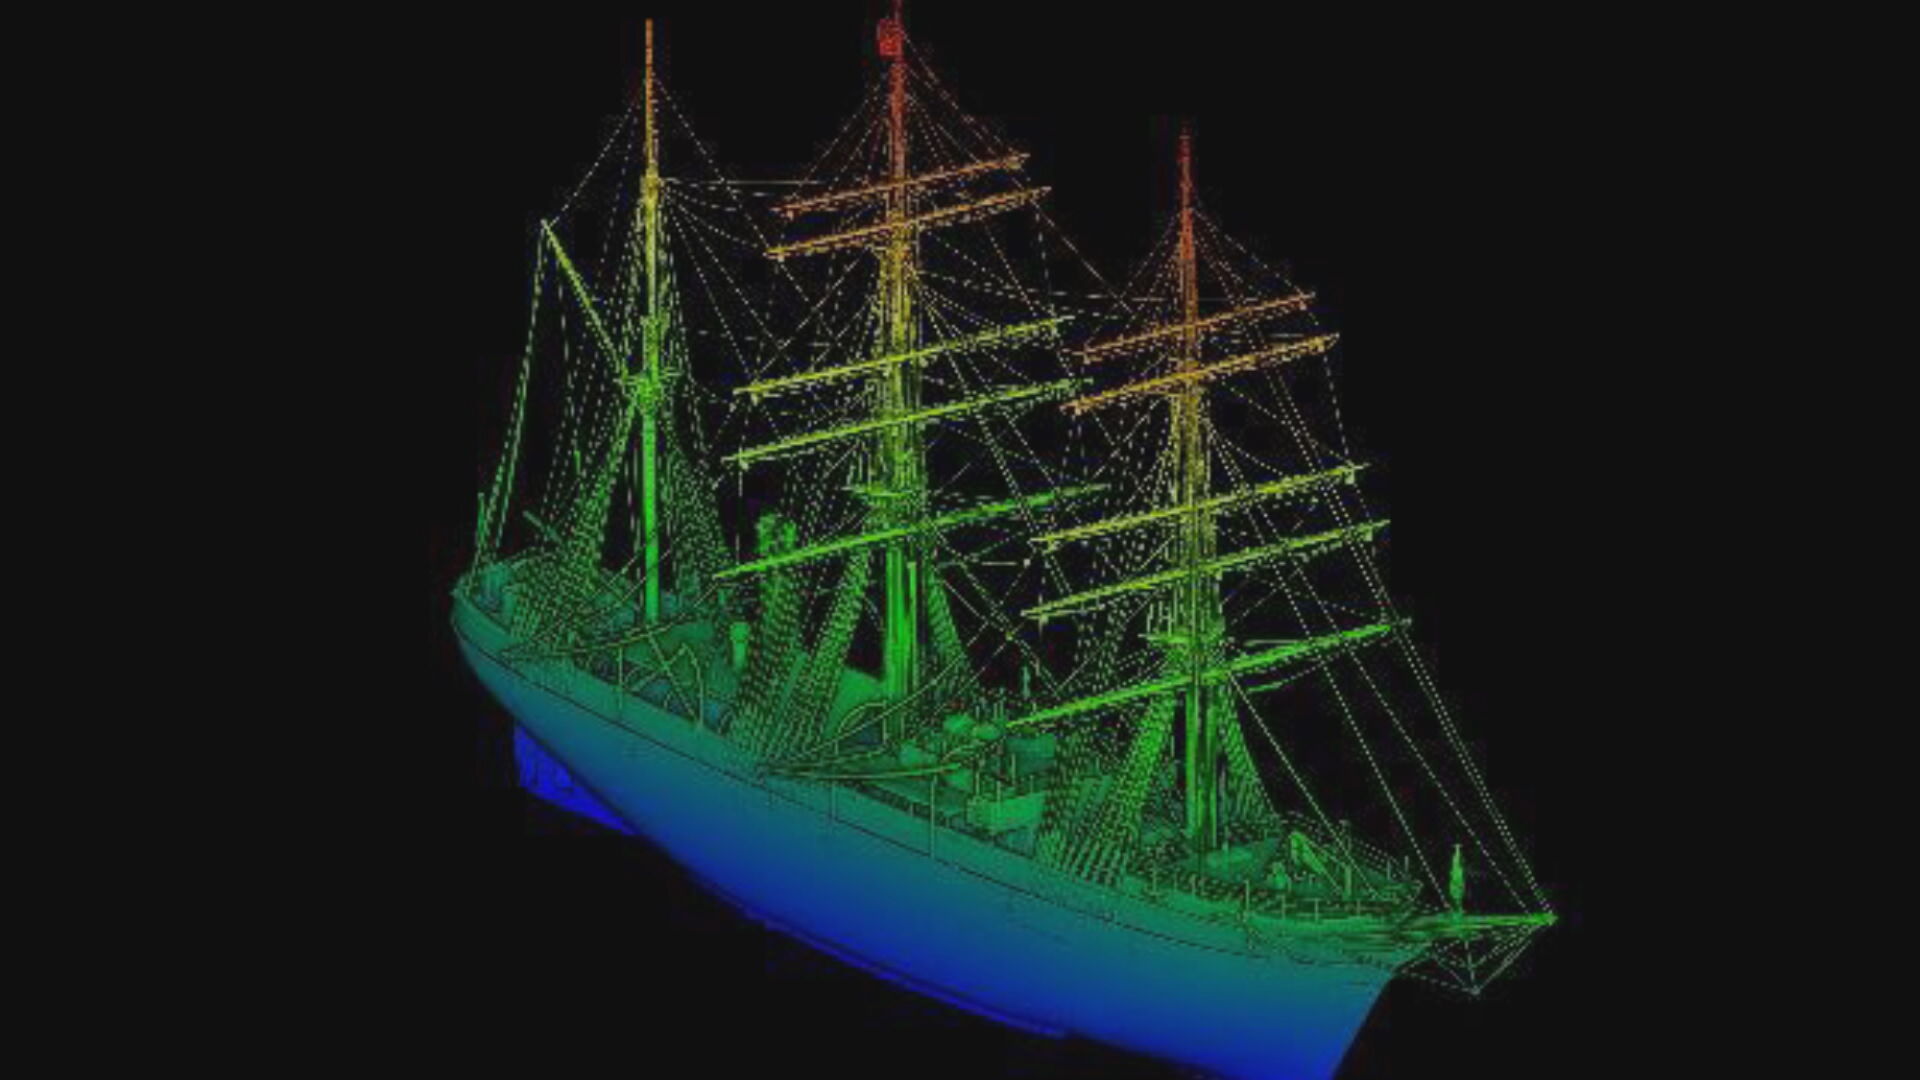 The RRS Discovery was the first ship in the world purposely built for scientific research in ice-packed Antarctica.